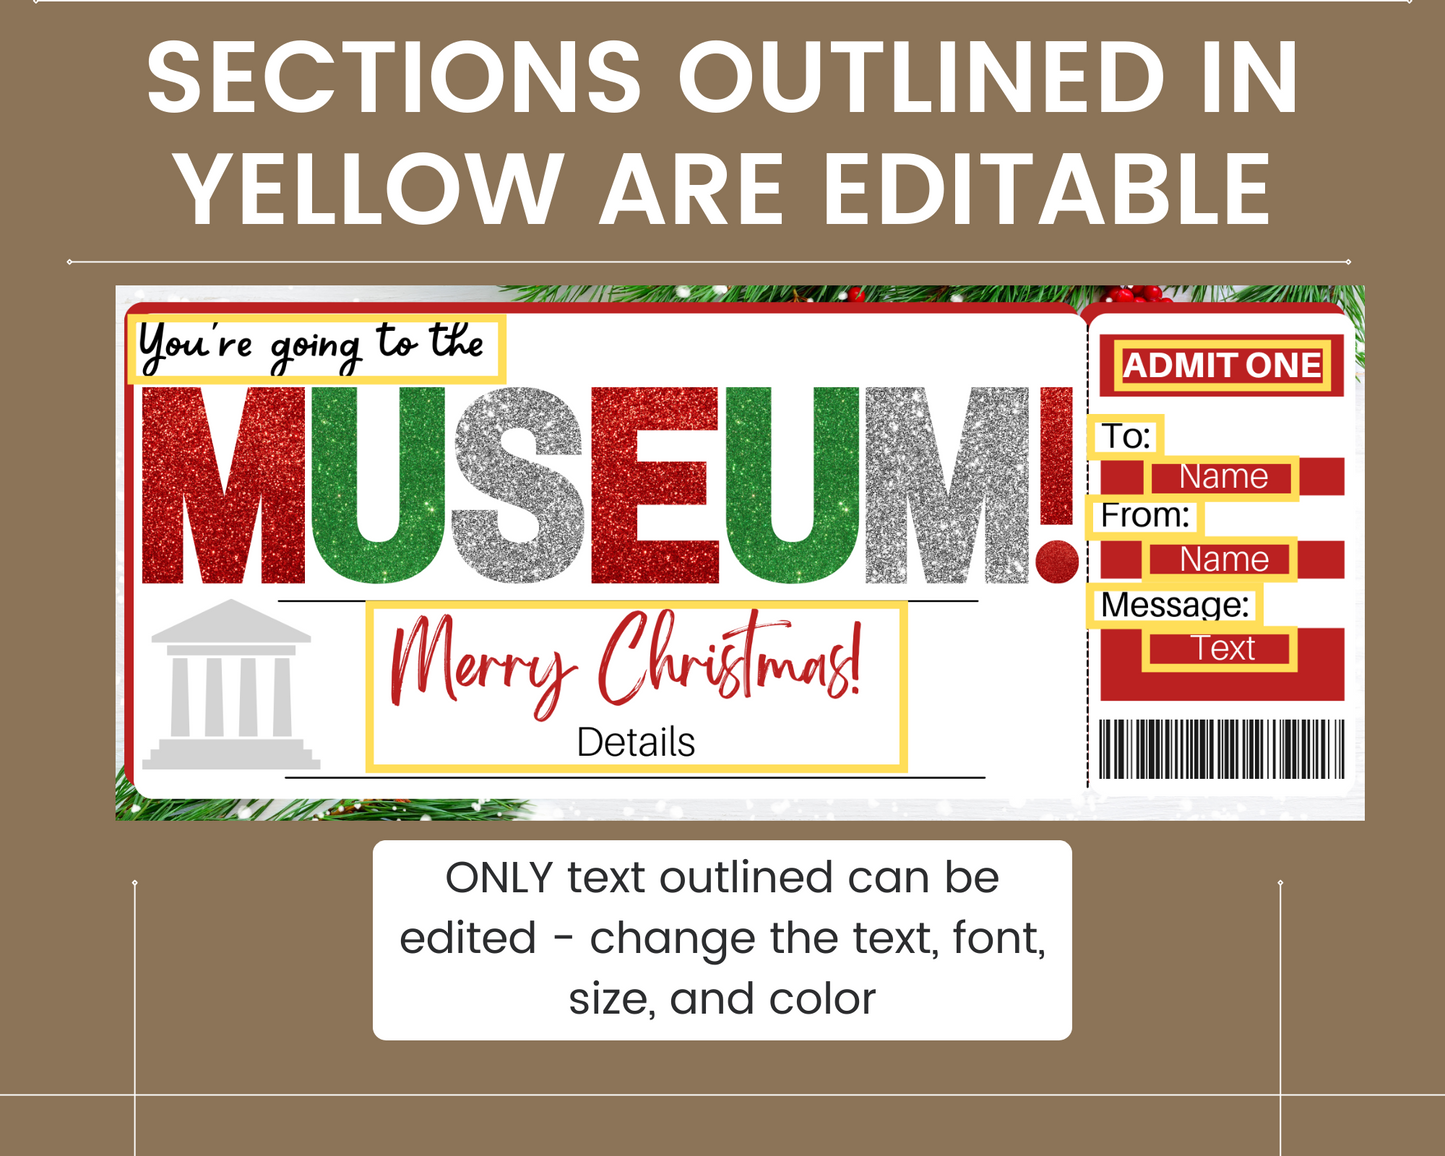 Christmas Museum Gift Ticket Template